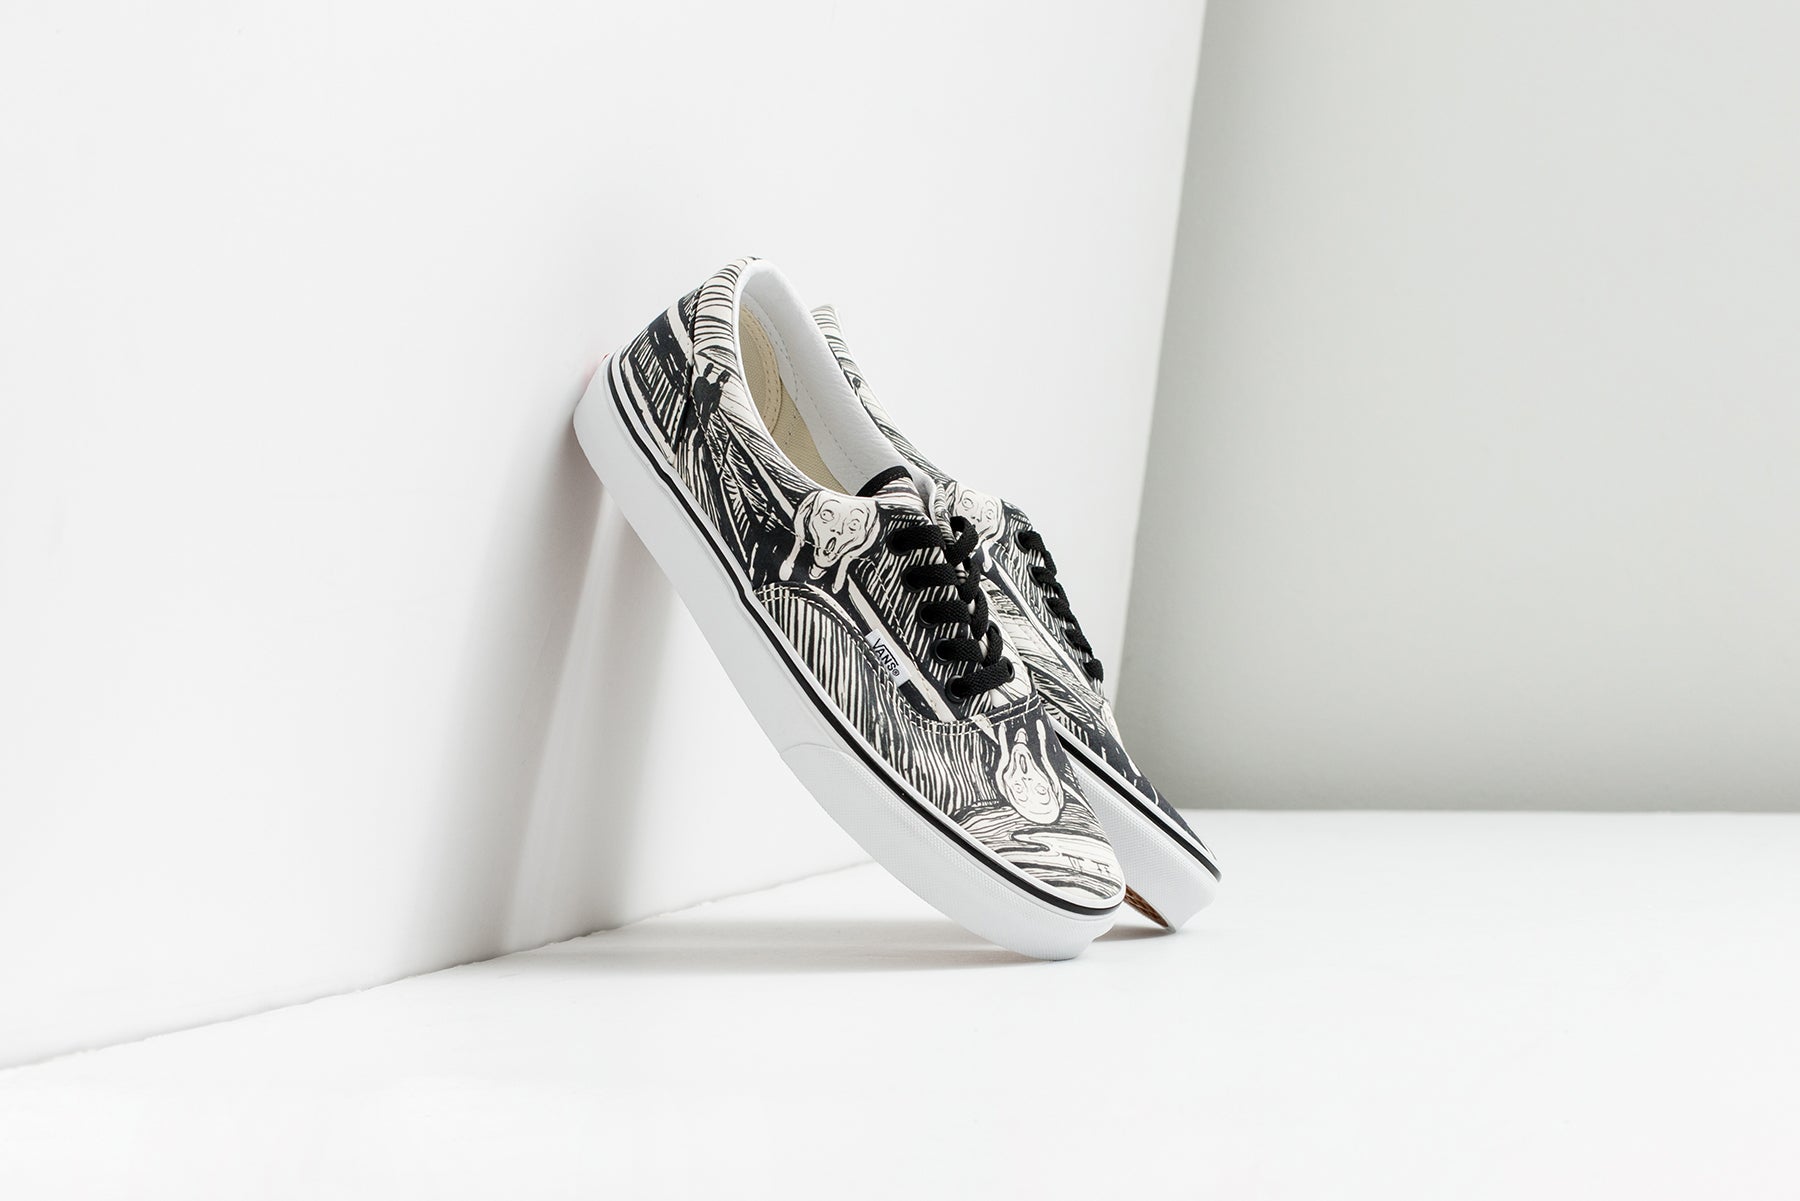 An Expressive Capsule. Vans x MoMA Release 11/11 – Feature